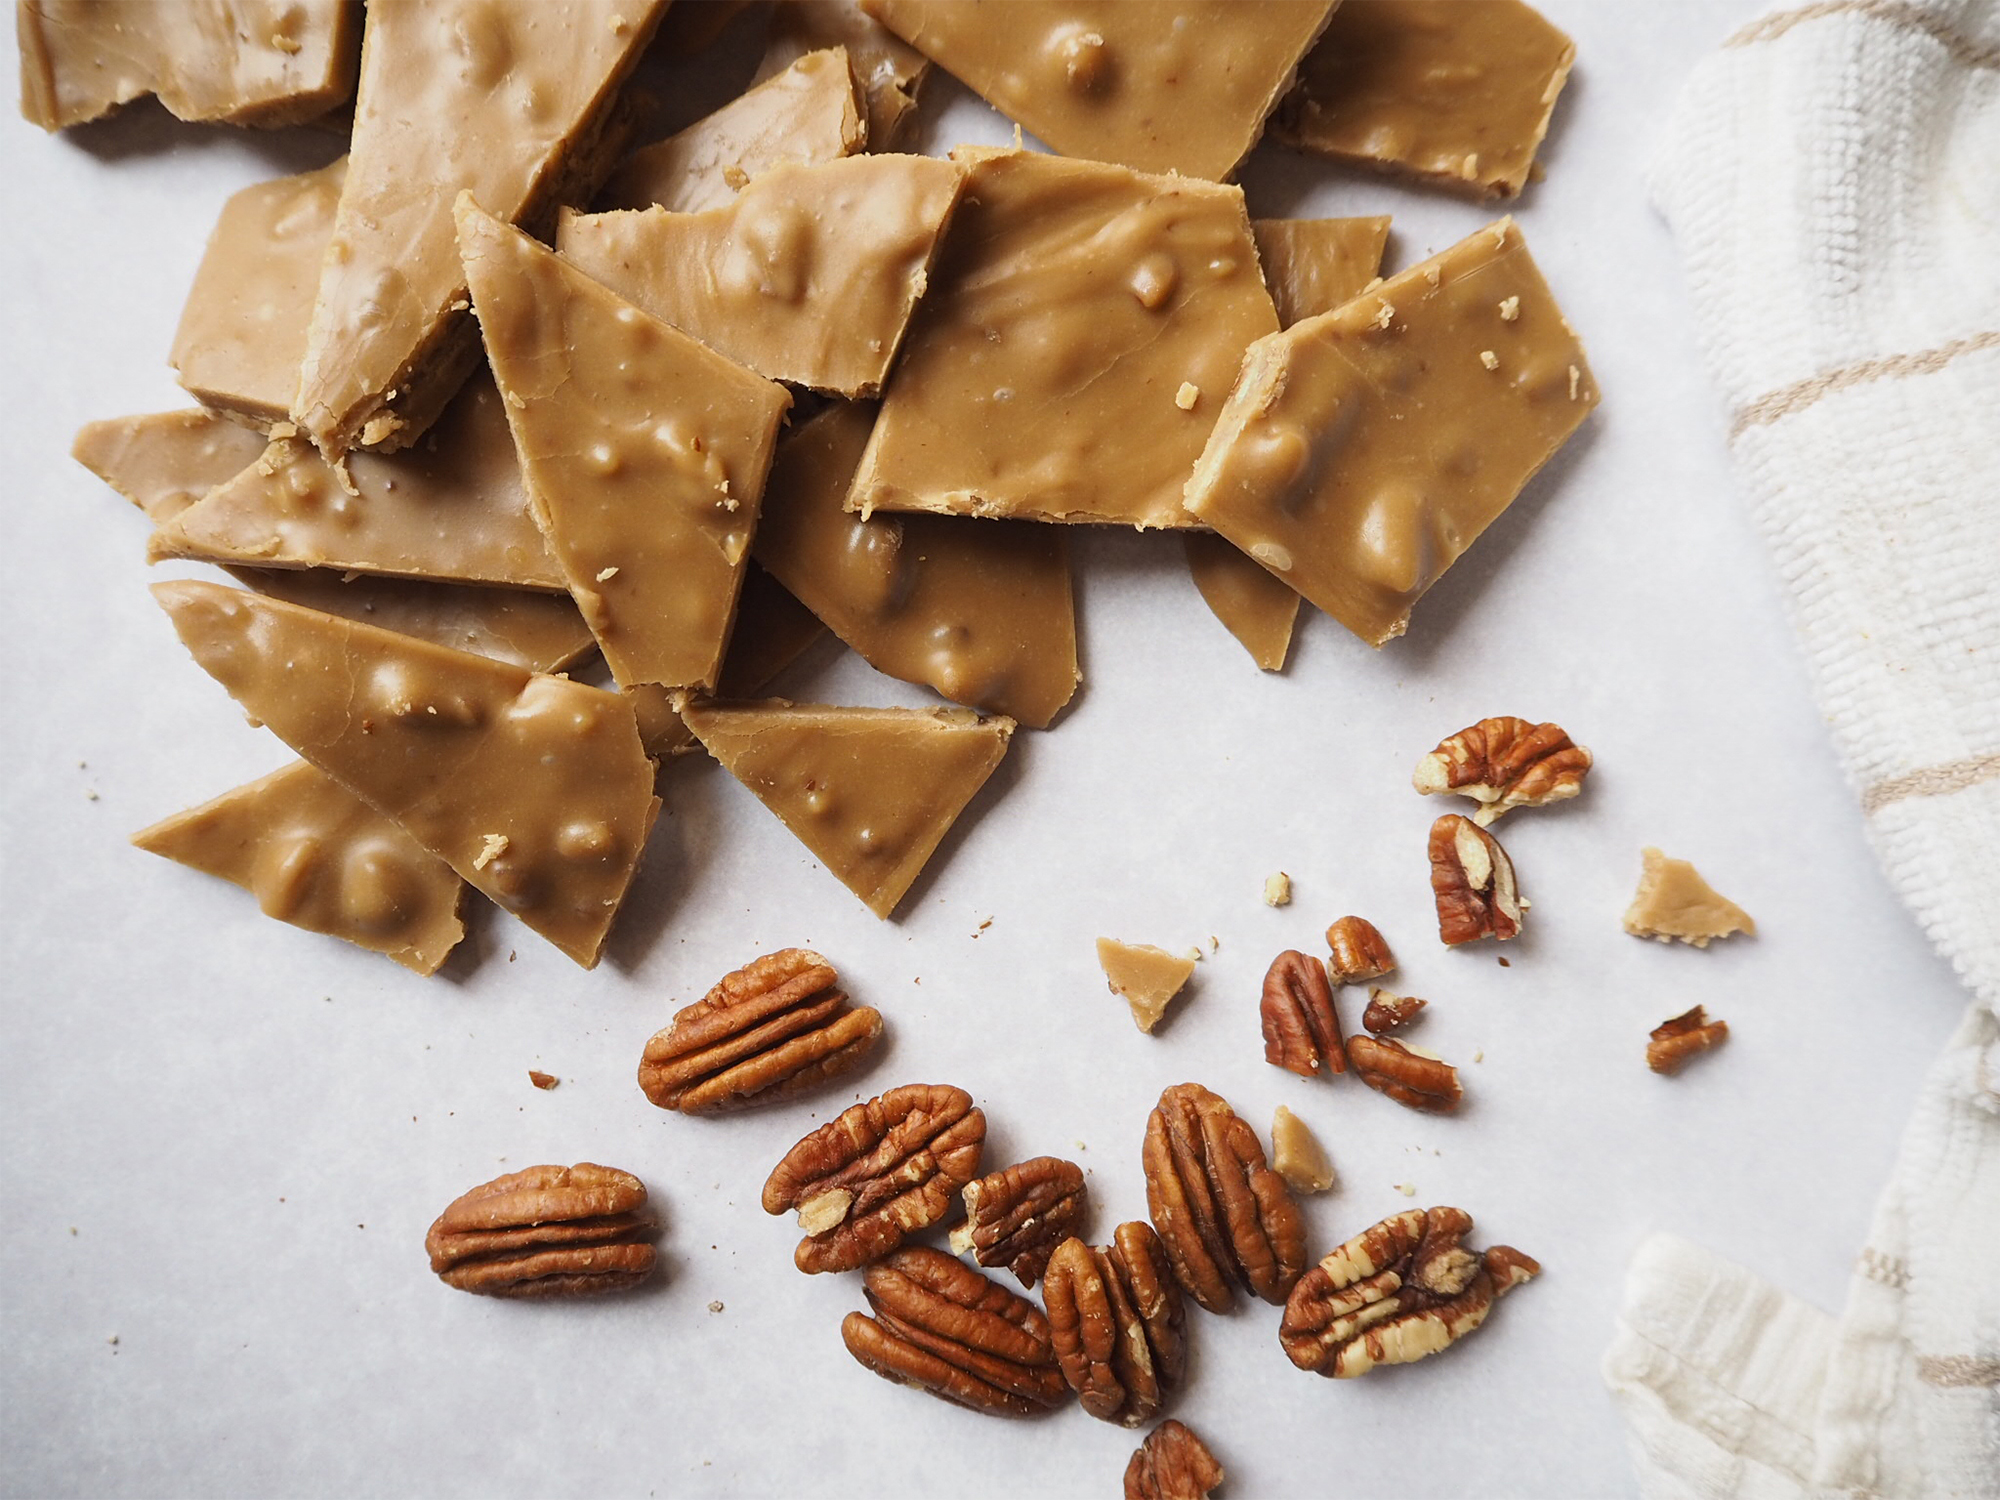 Caramel Frosting pieces in a pile next to some pecans